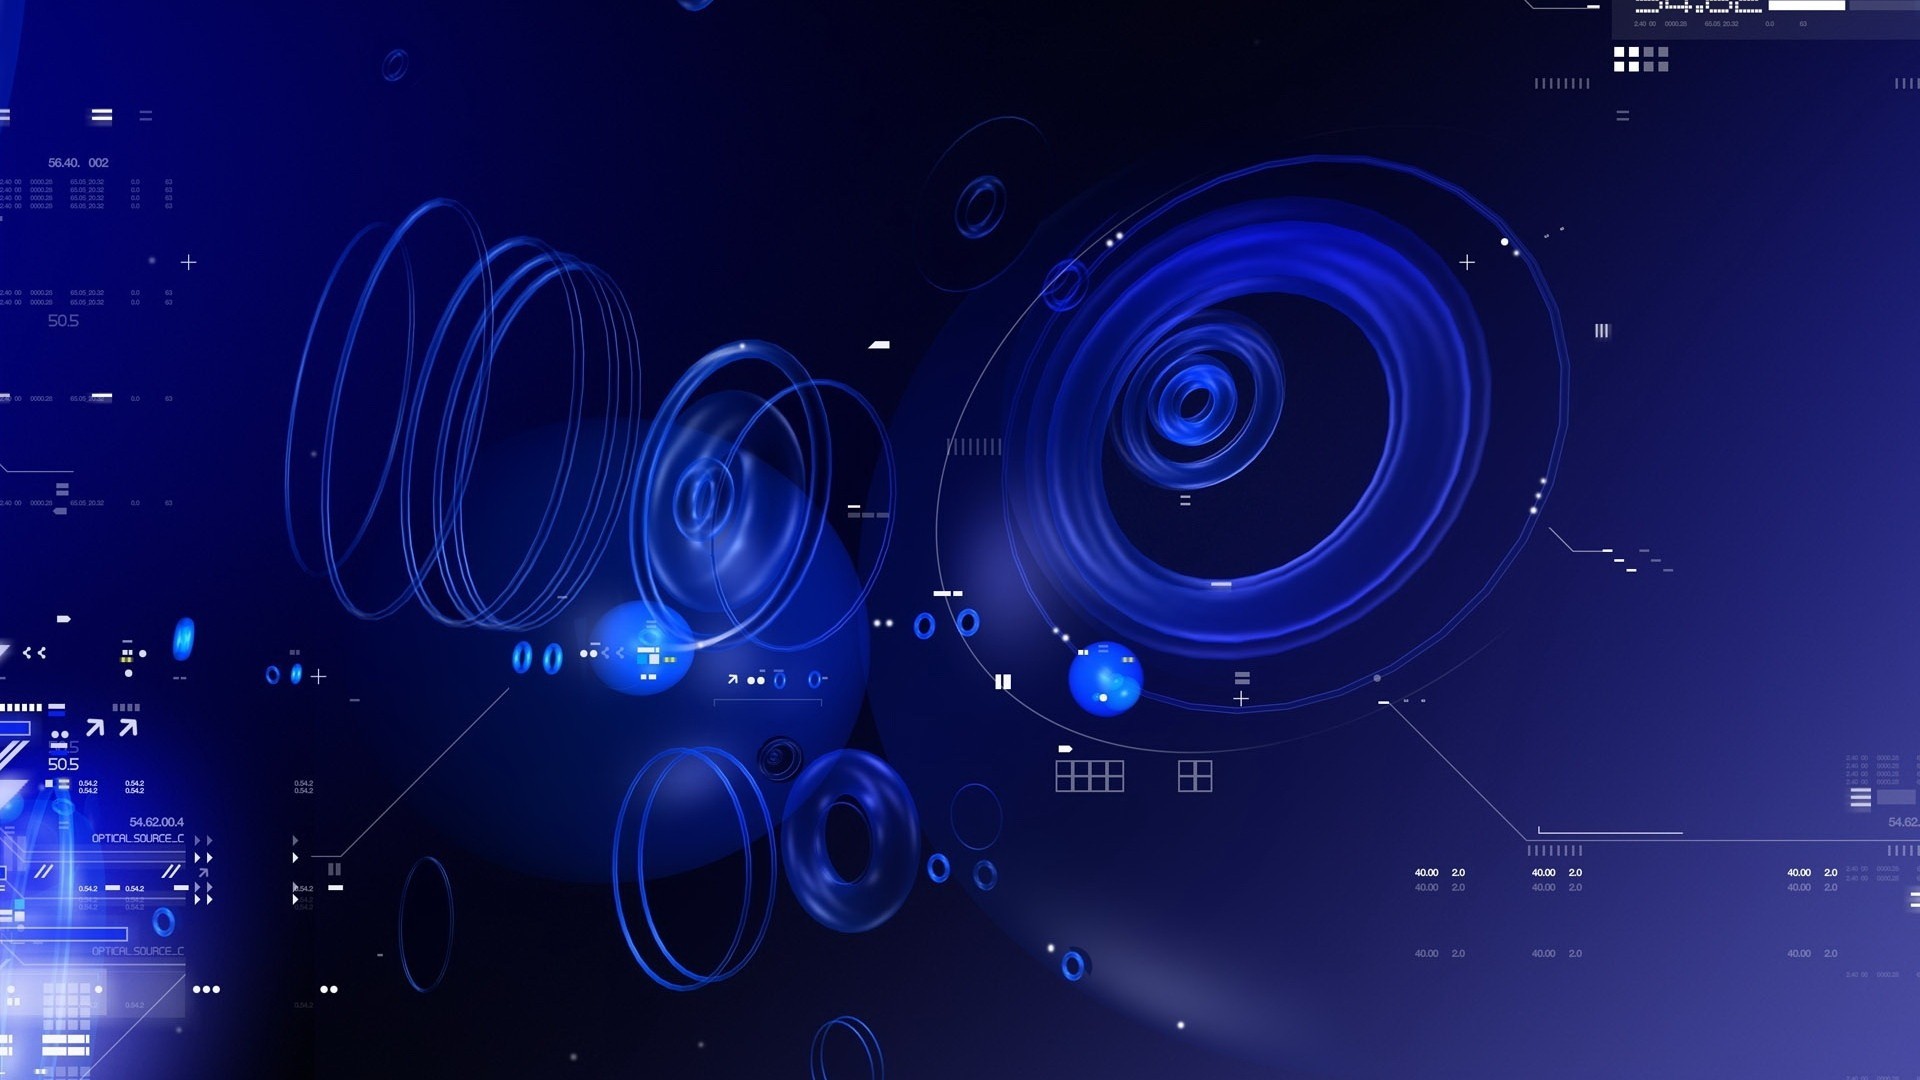 1920x1080 Blue Tech Circles Stills,Images,Photos,Pictures,Wallpapers